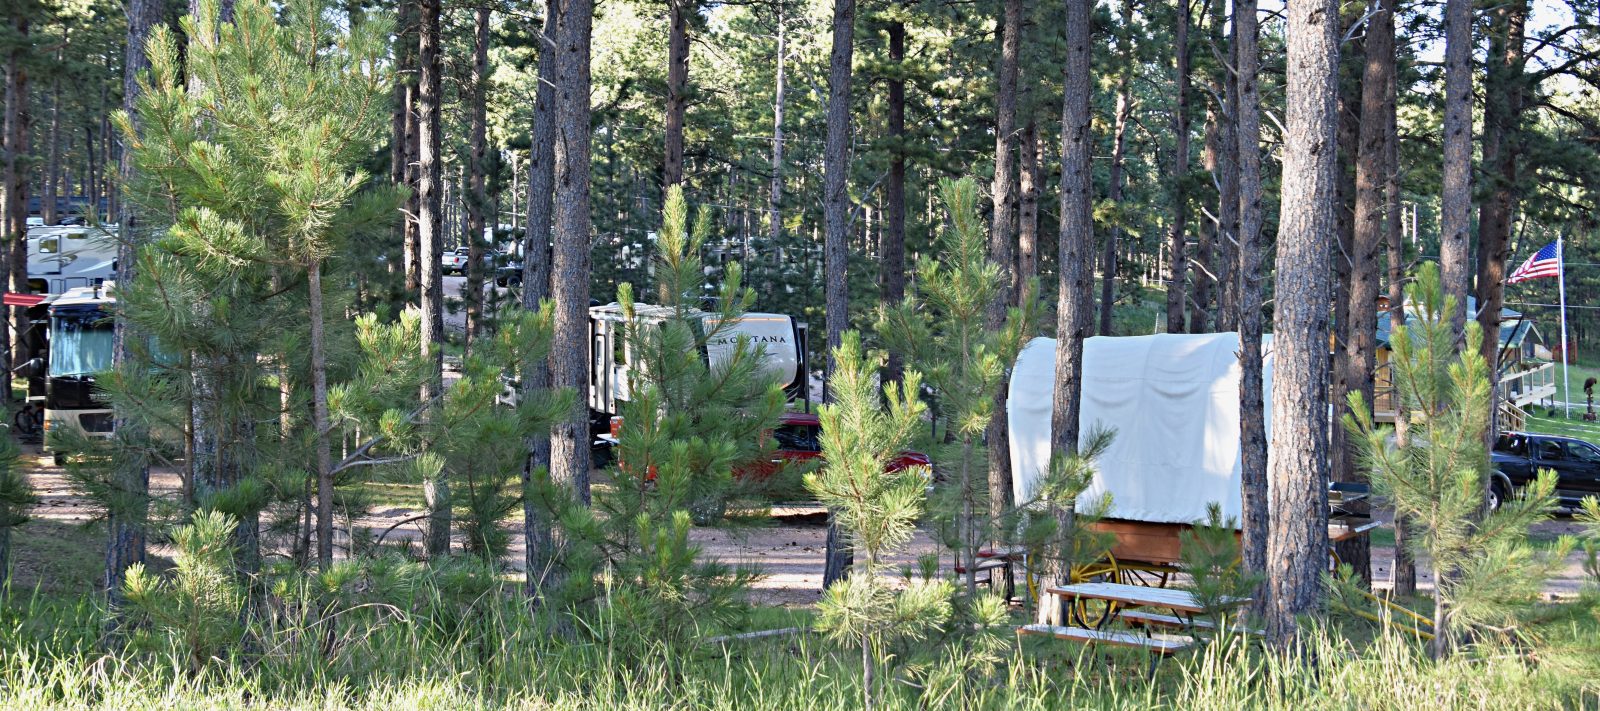 Job Opportunities at Some Campgrounds in South Dakota